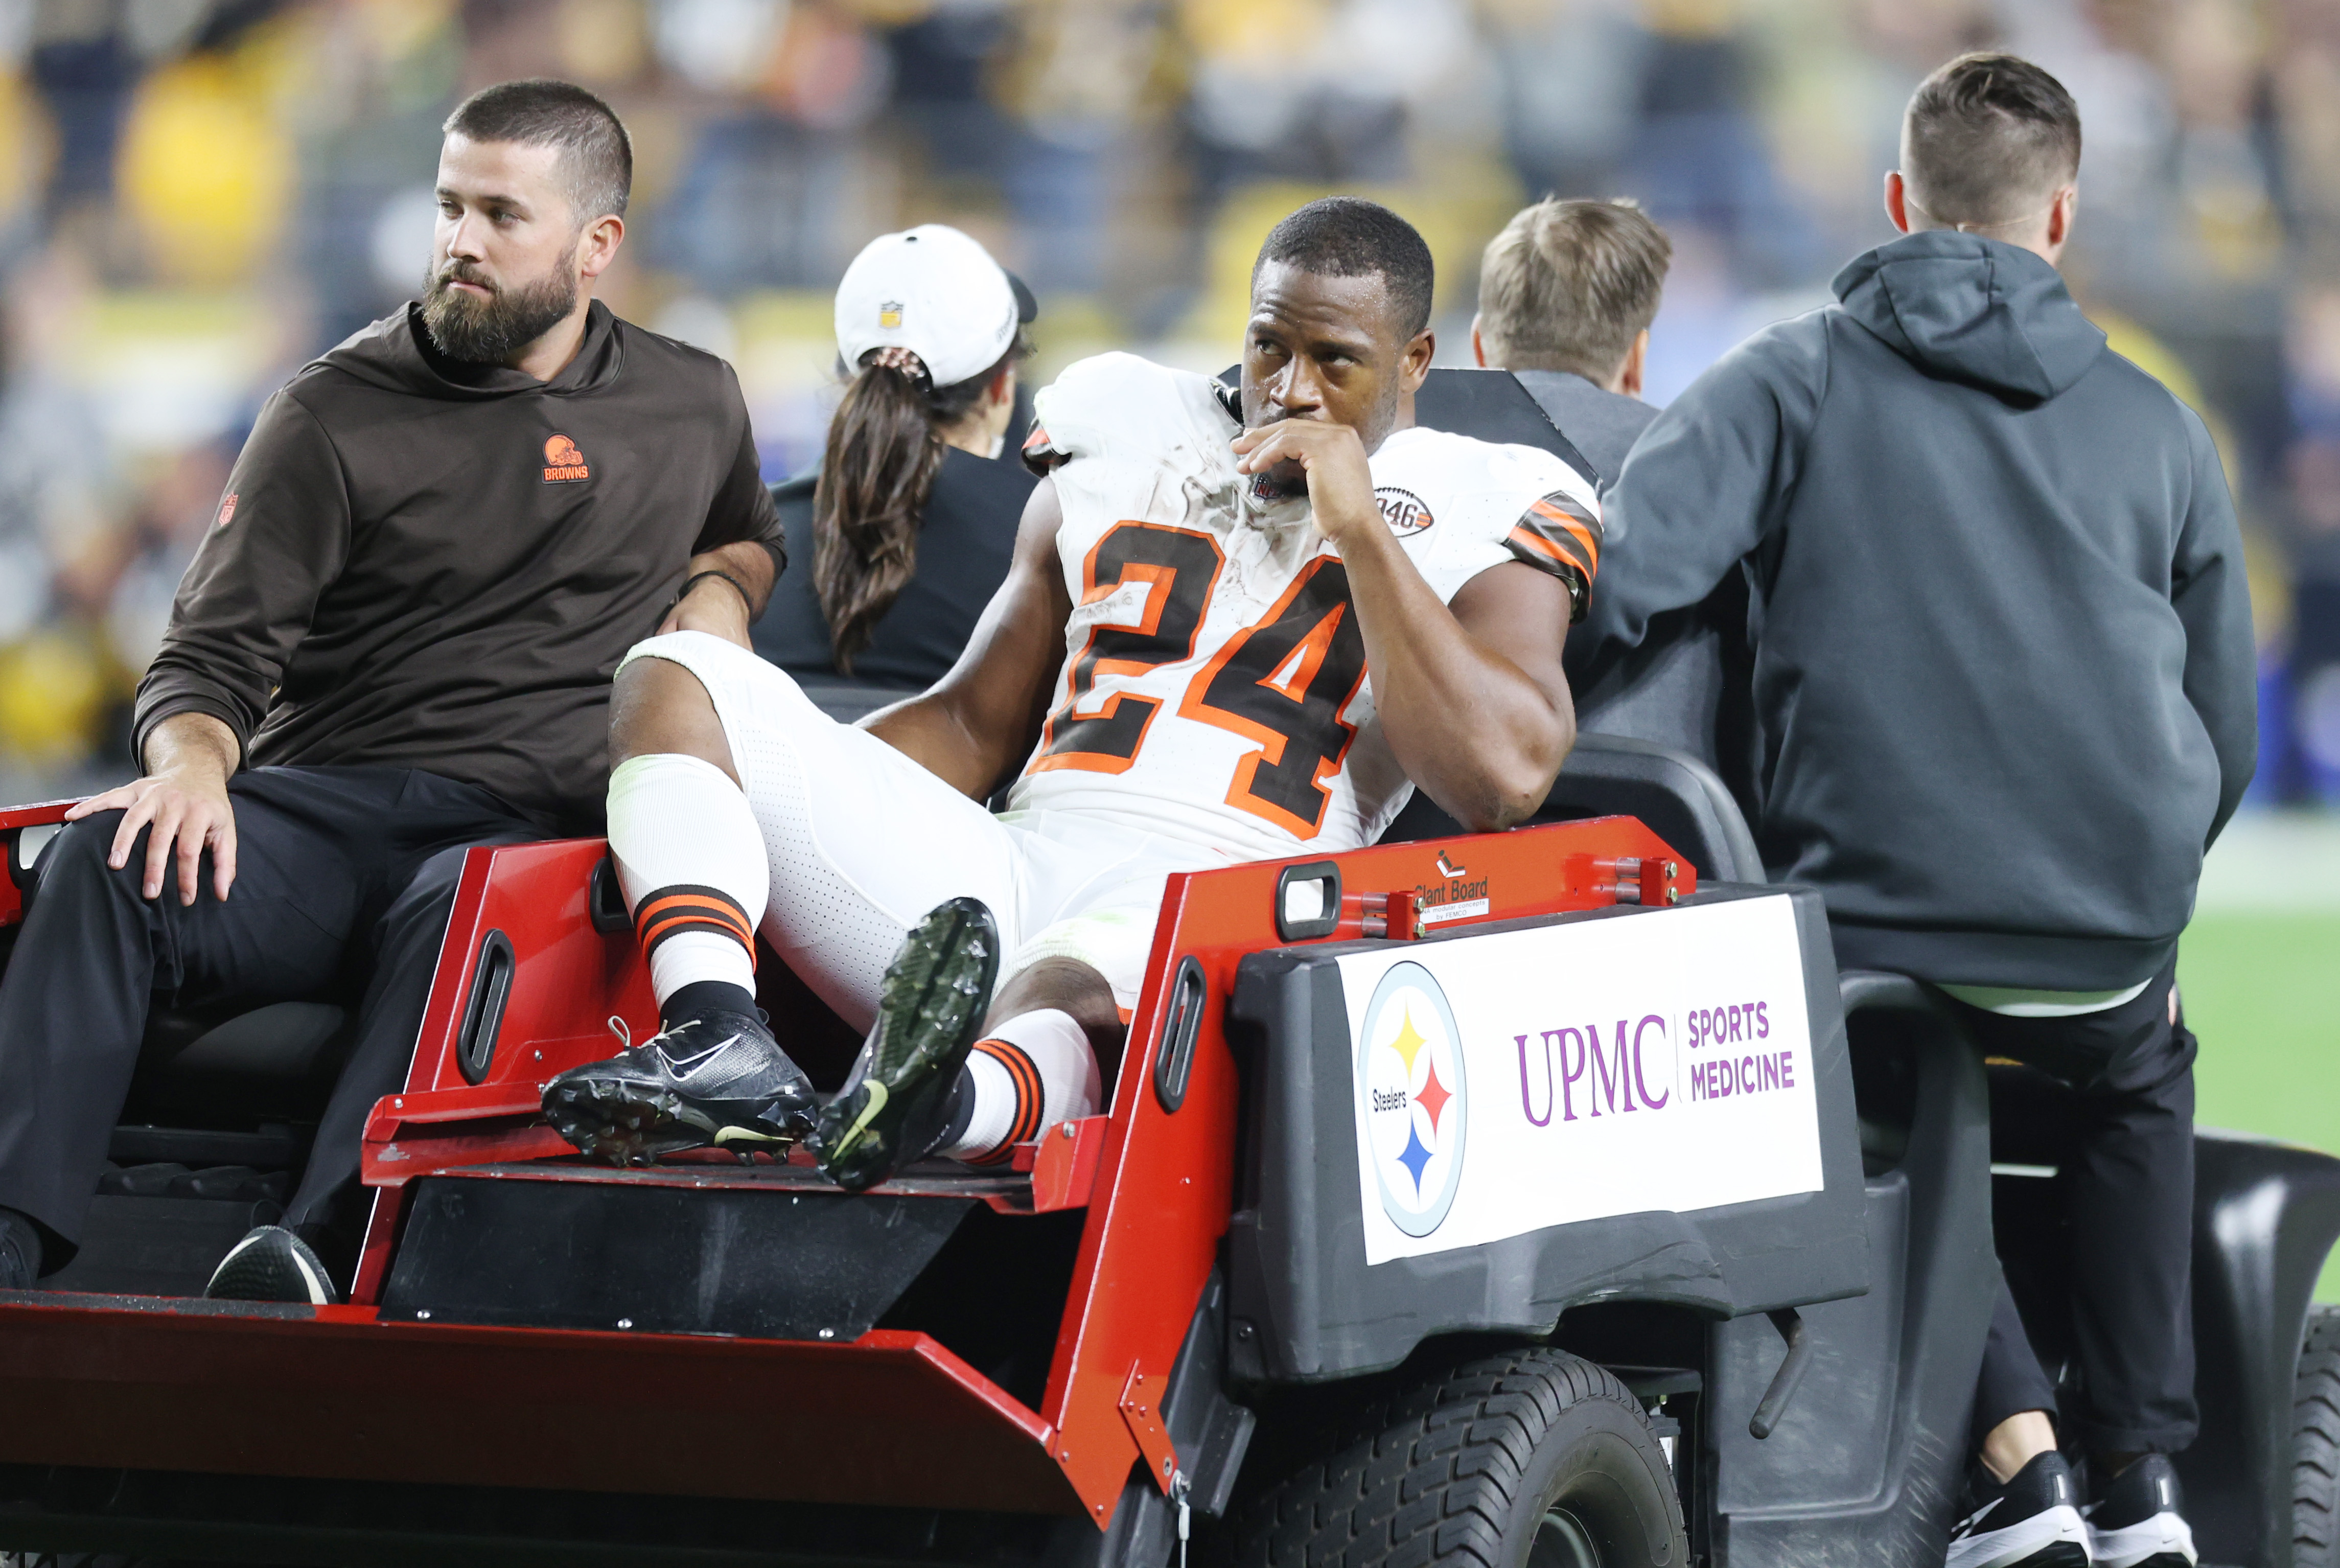 Replay of Nick Chubb injury is so gruesome ESPN broadcast won't